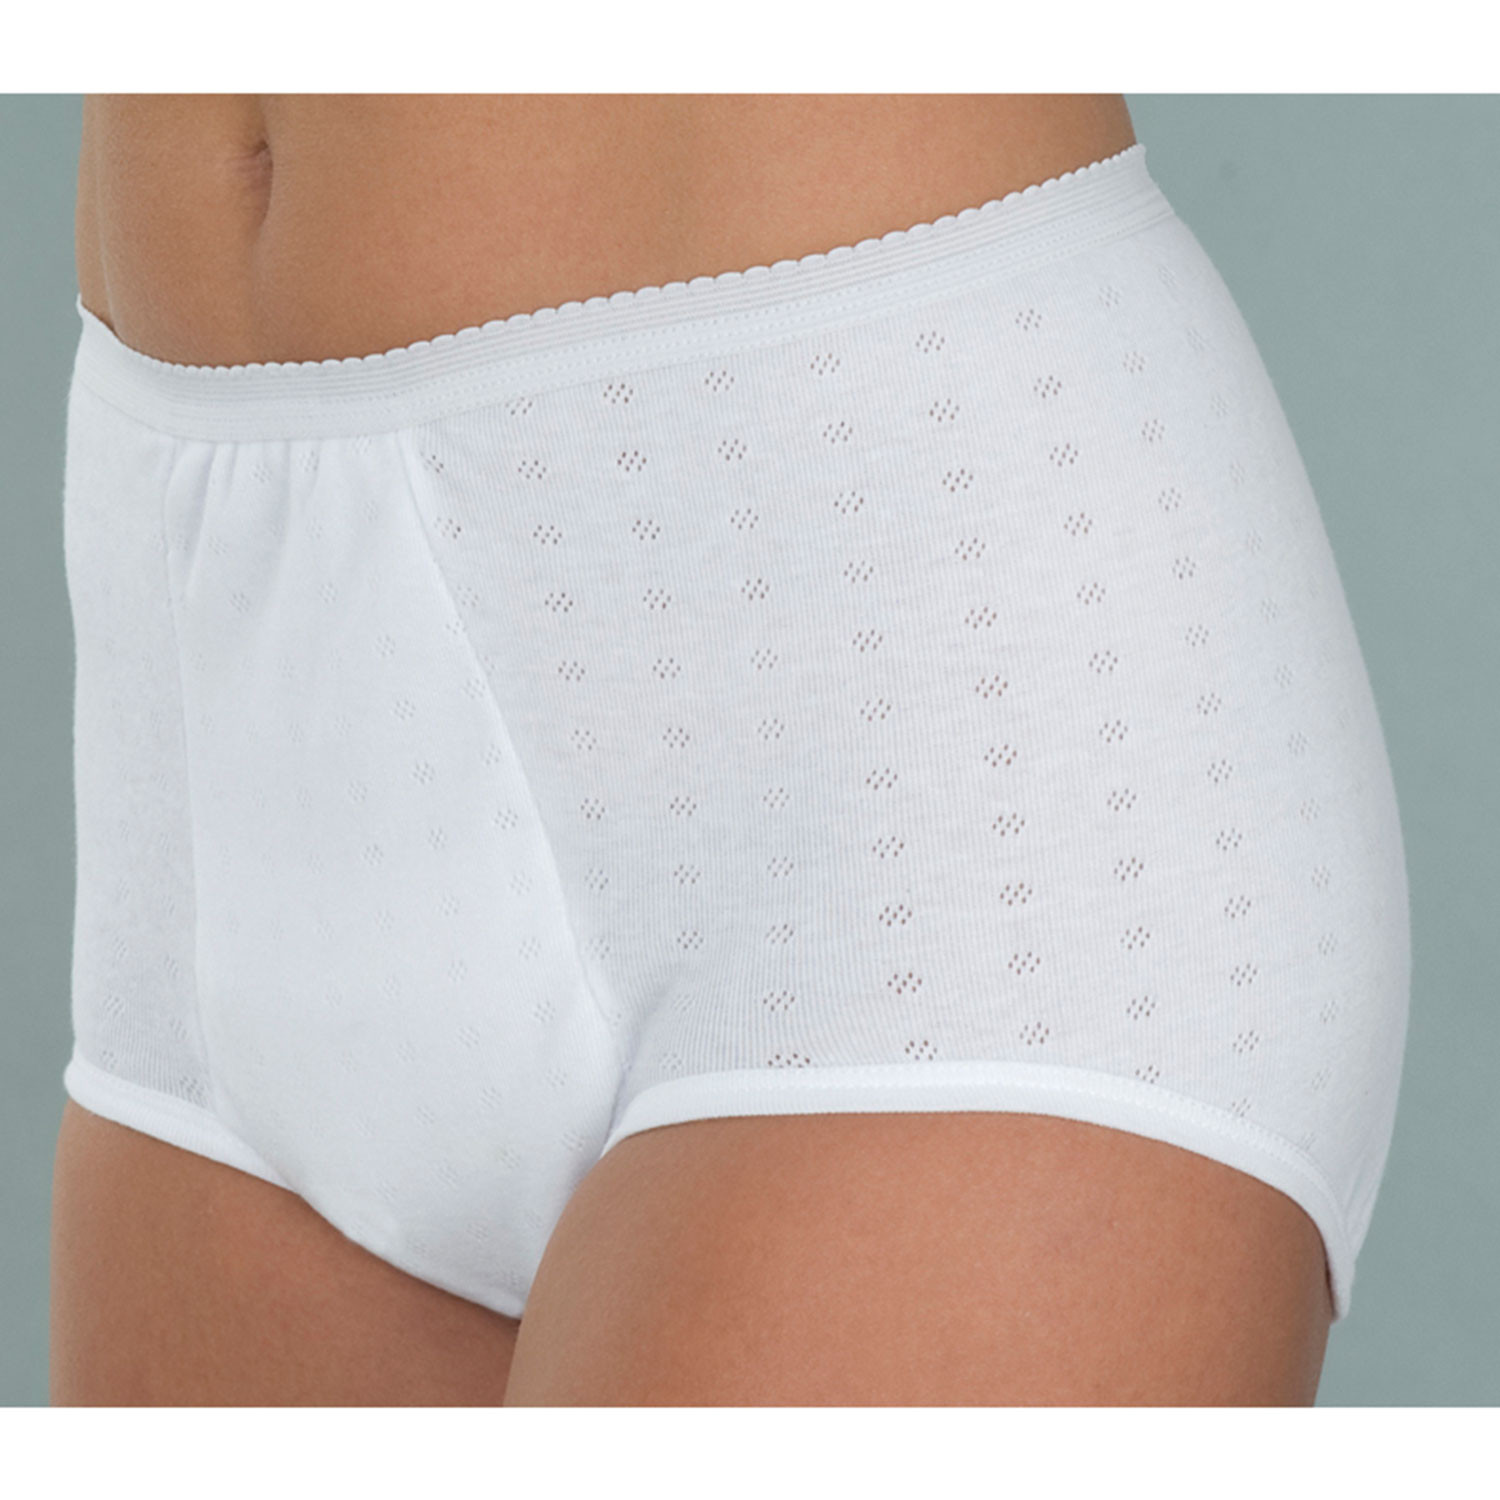 Seamless Smooth & Silky Panties - Washable Wearever Incontinence